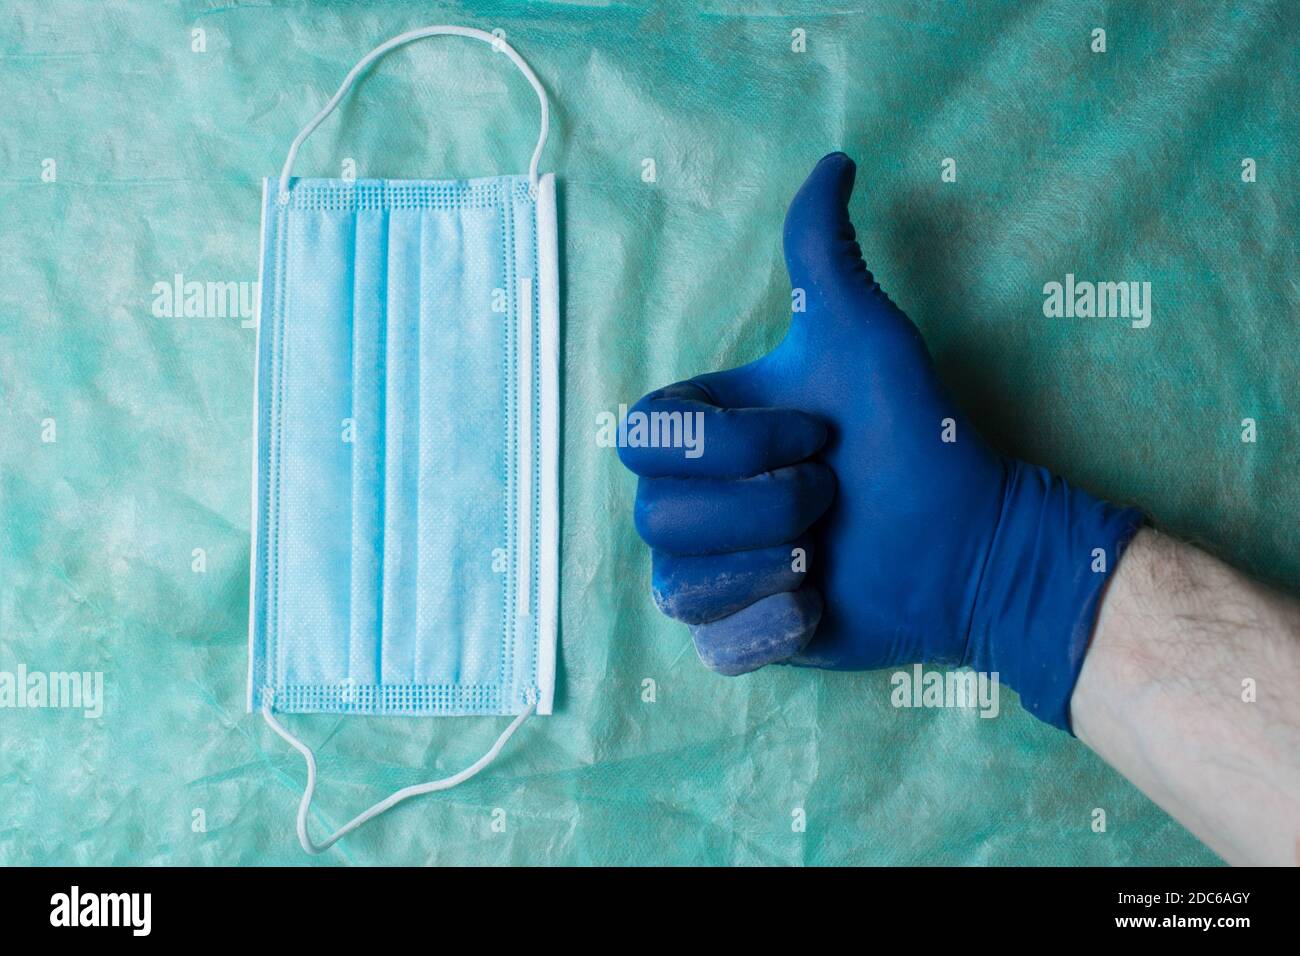 A hand with thumb up as an approval gesture with a blue glove next to a surgical mask. Health care and surgical concept. Personal protective equipment. Stock Photo